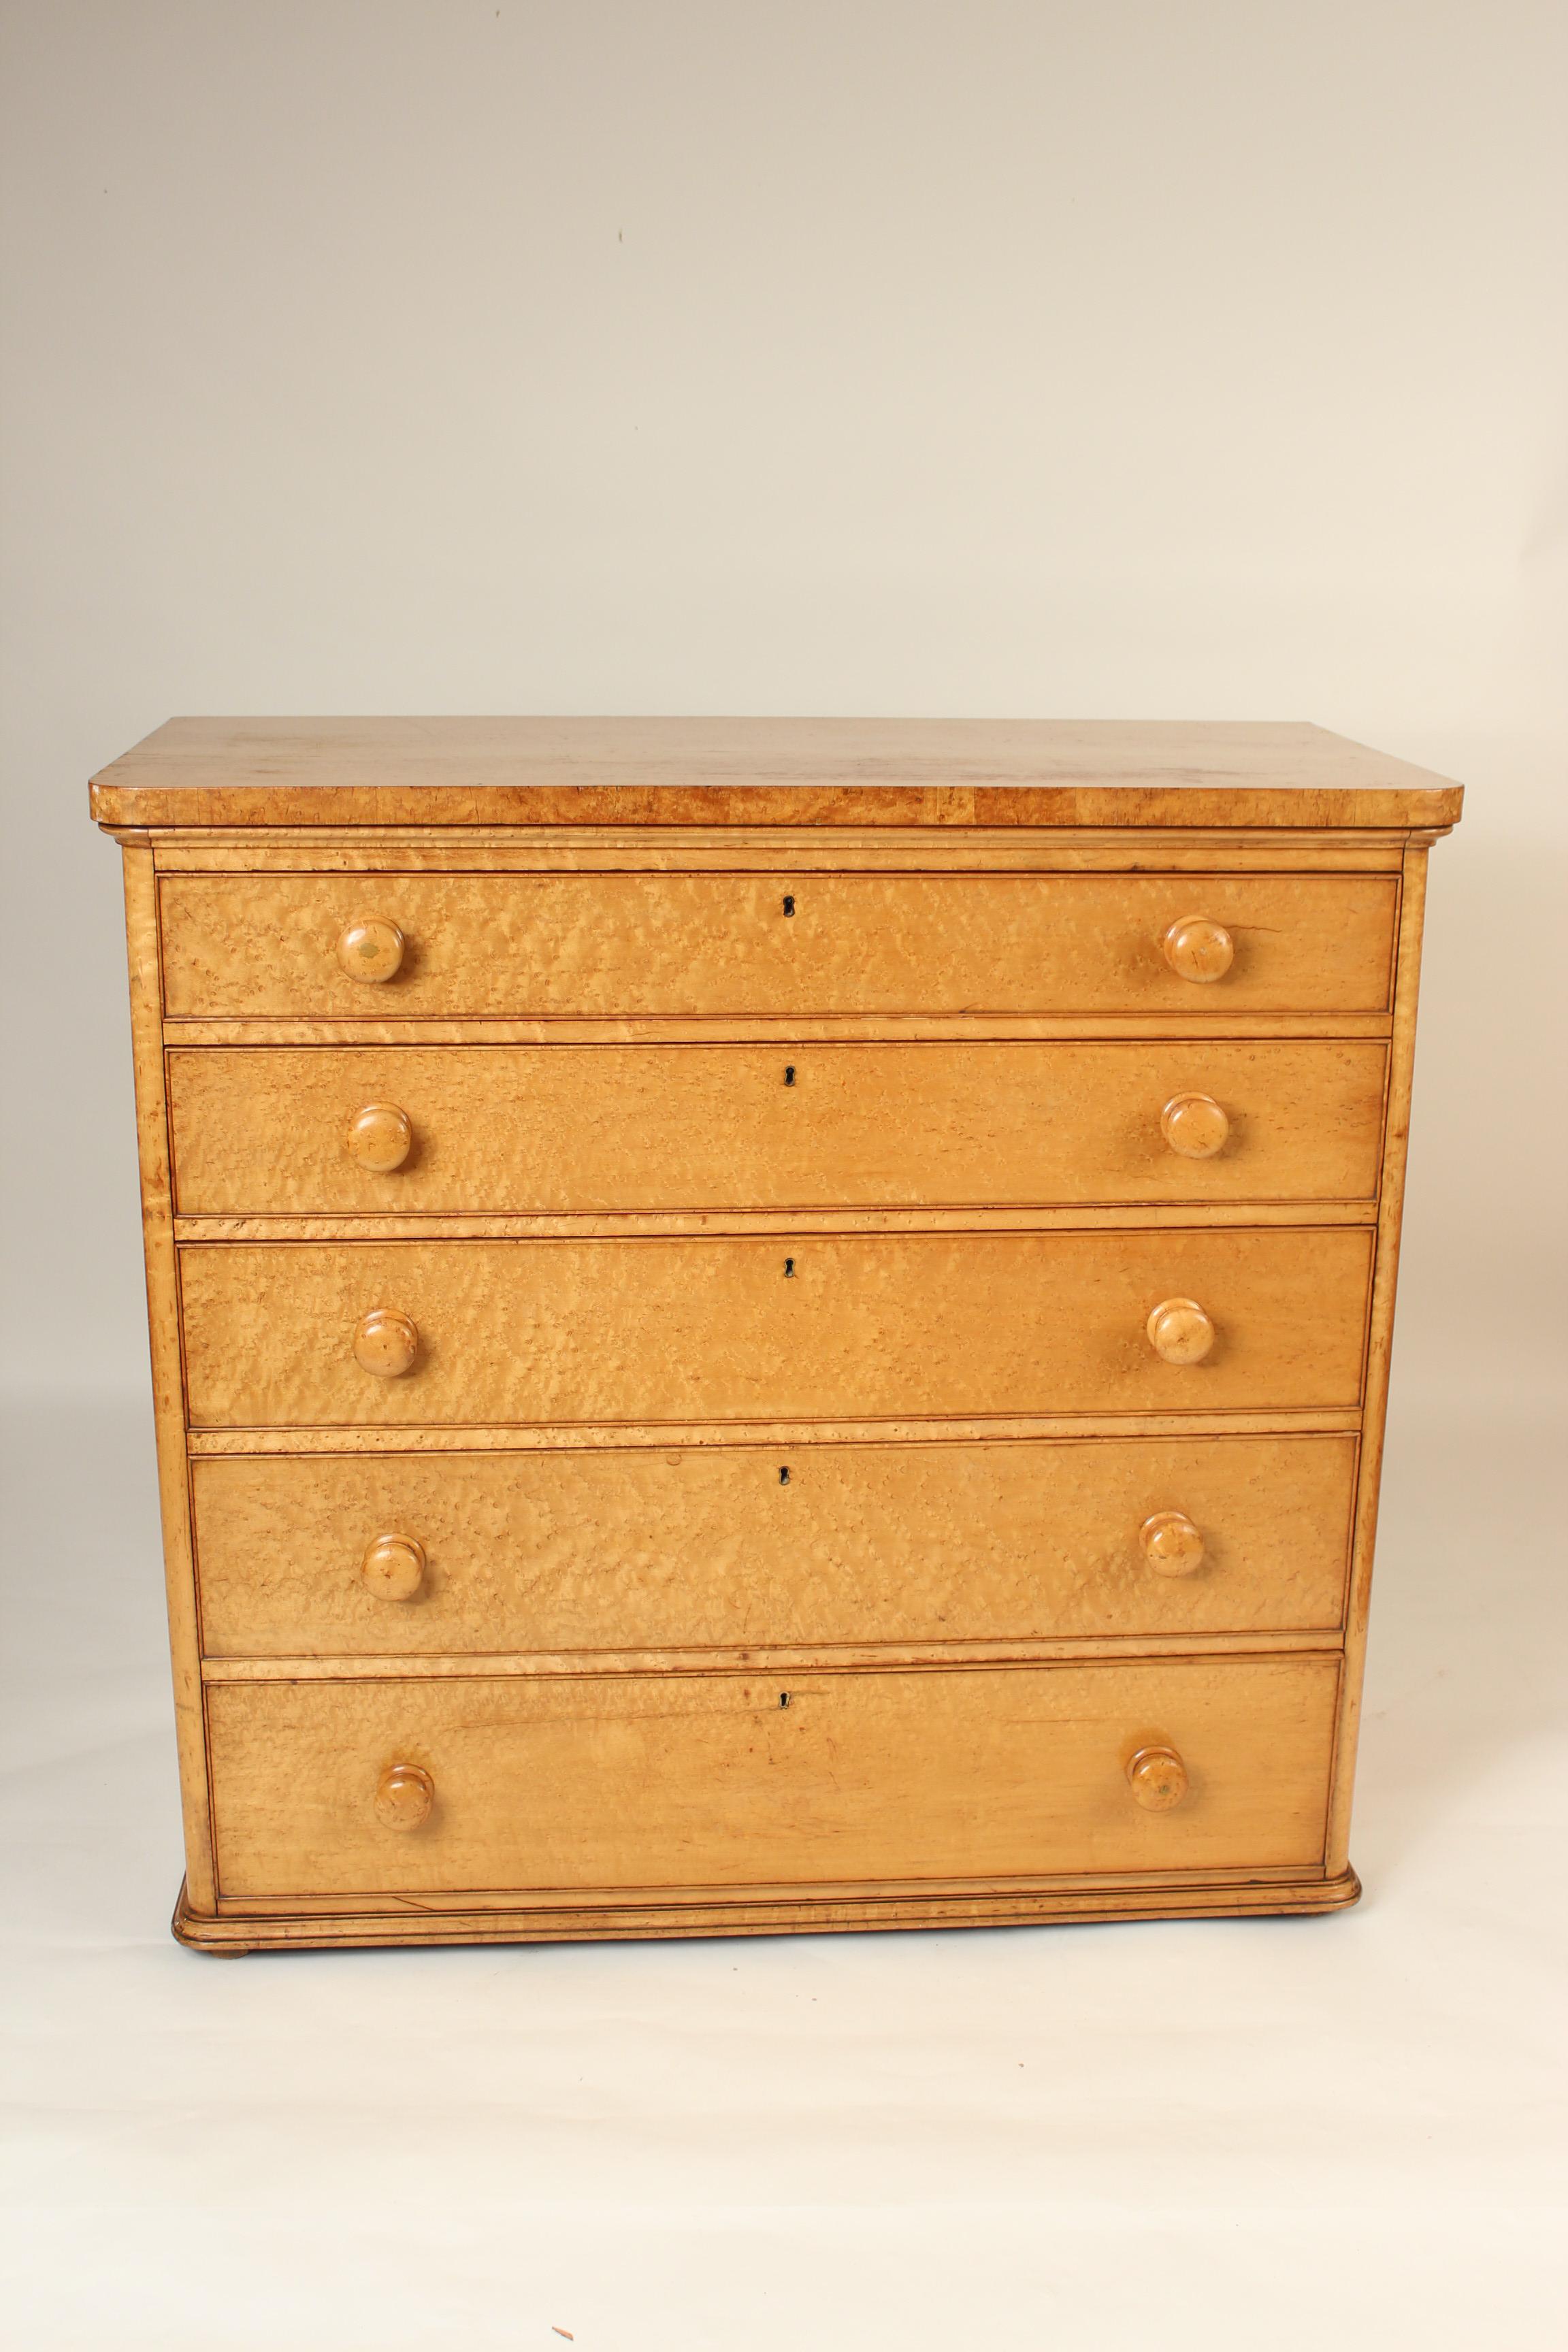 William IV style bird's-eye maple five drawer chest of drawers, circa 1920. Nice color bird's-eye maple. This chest has clean simple lines that would go well in either a contemporary or traditional interior.